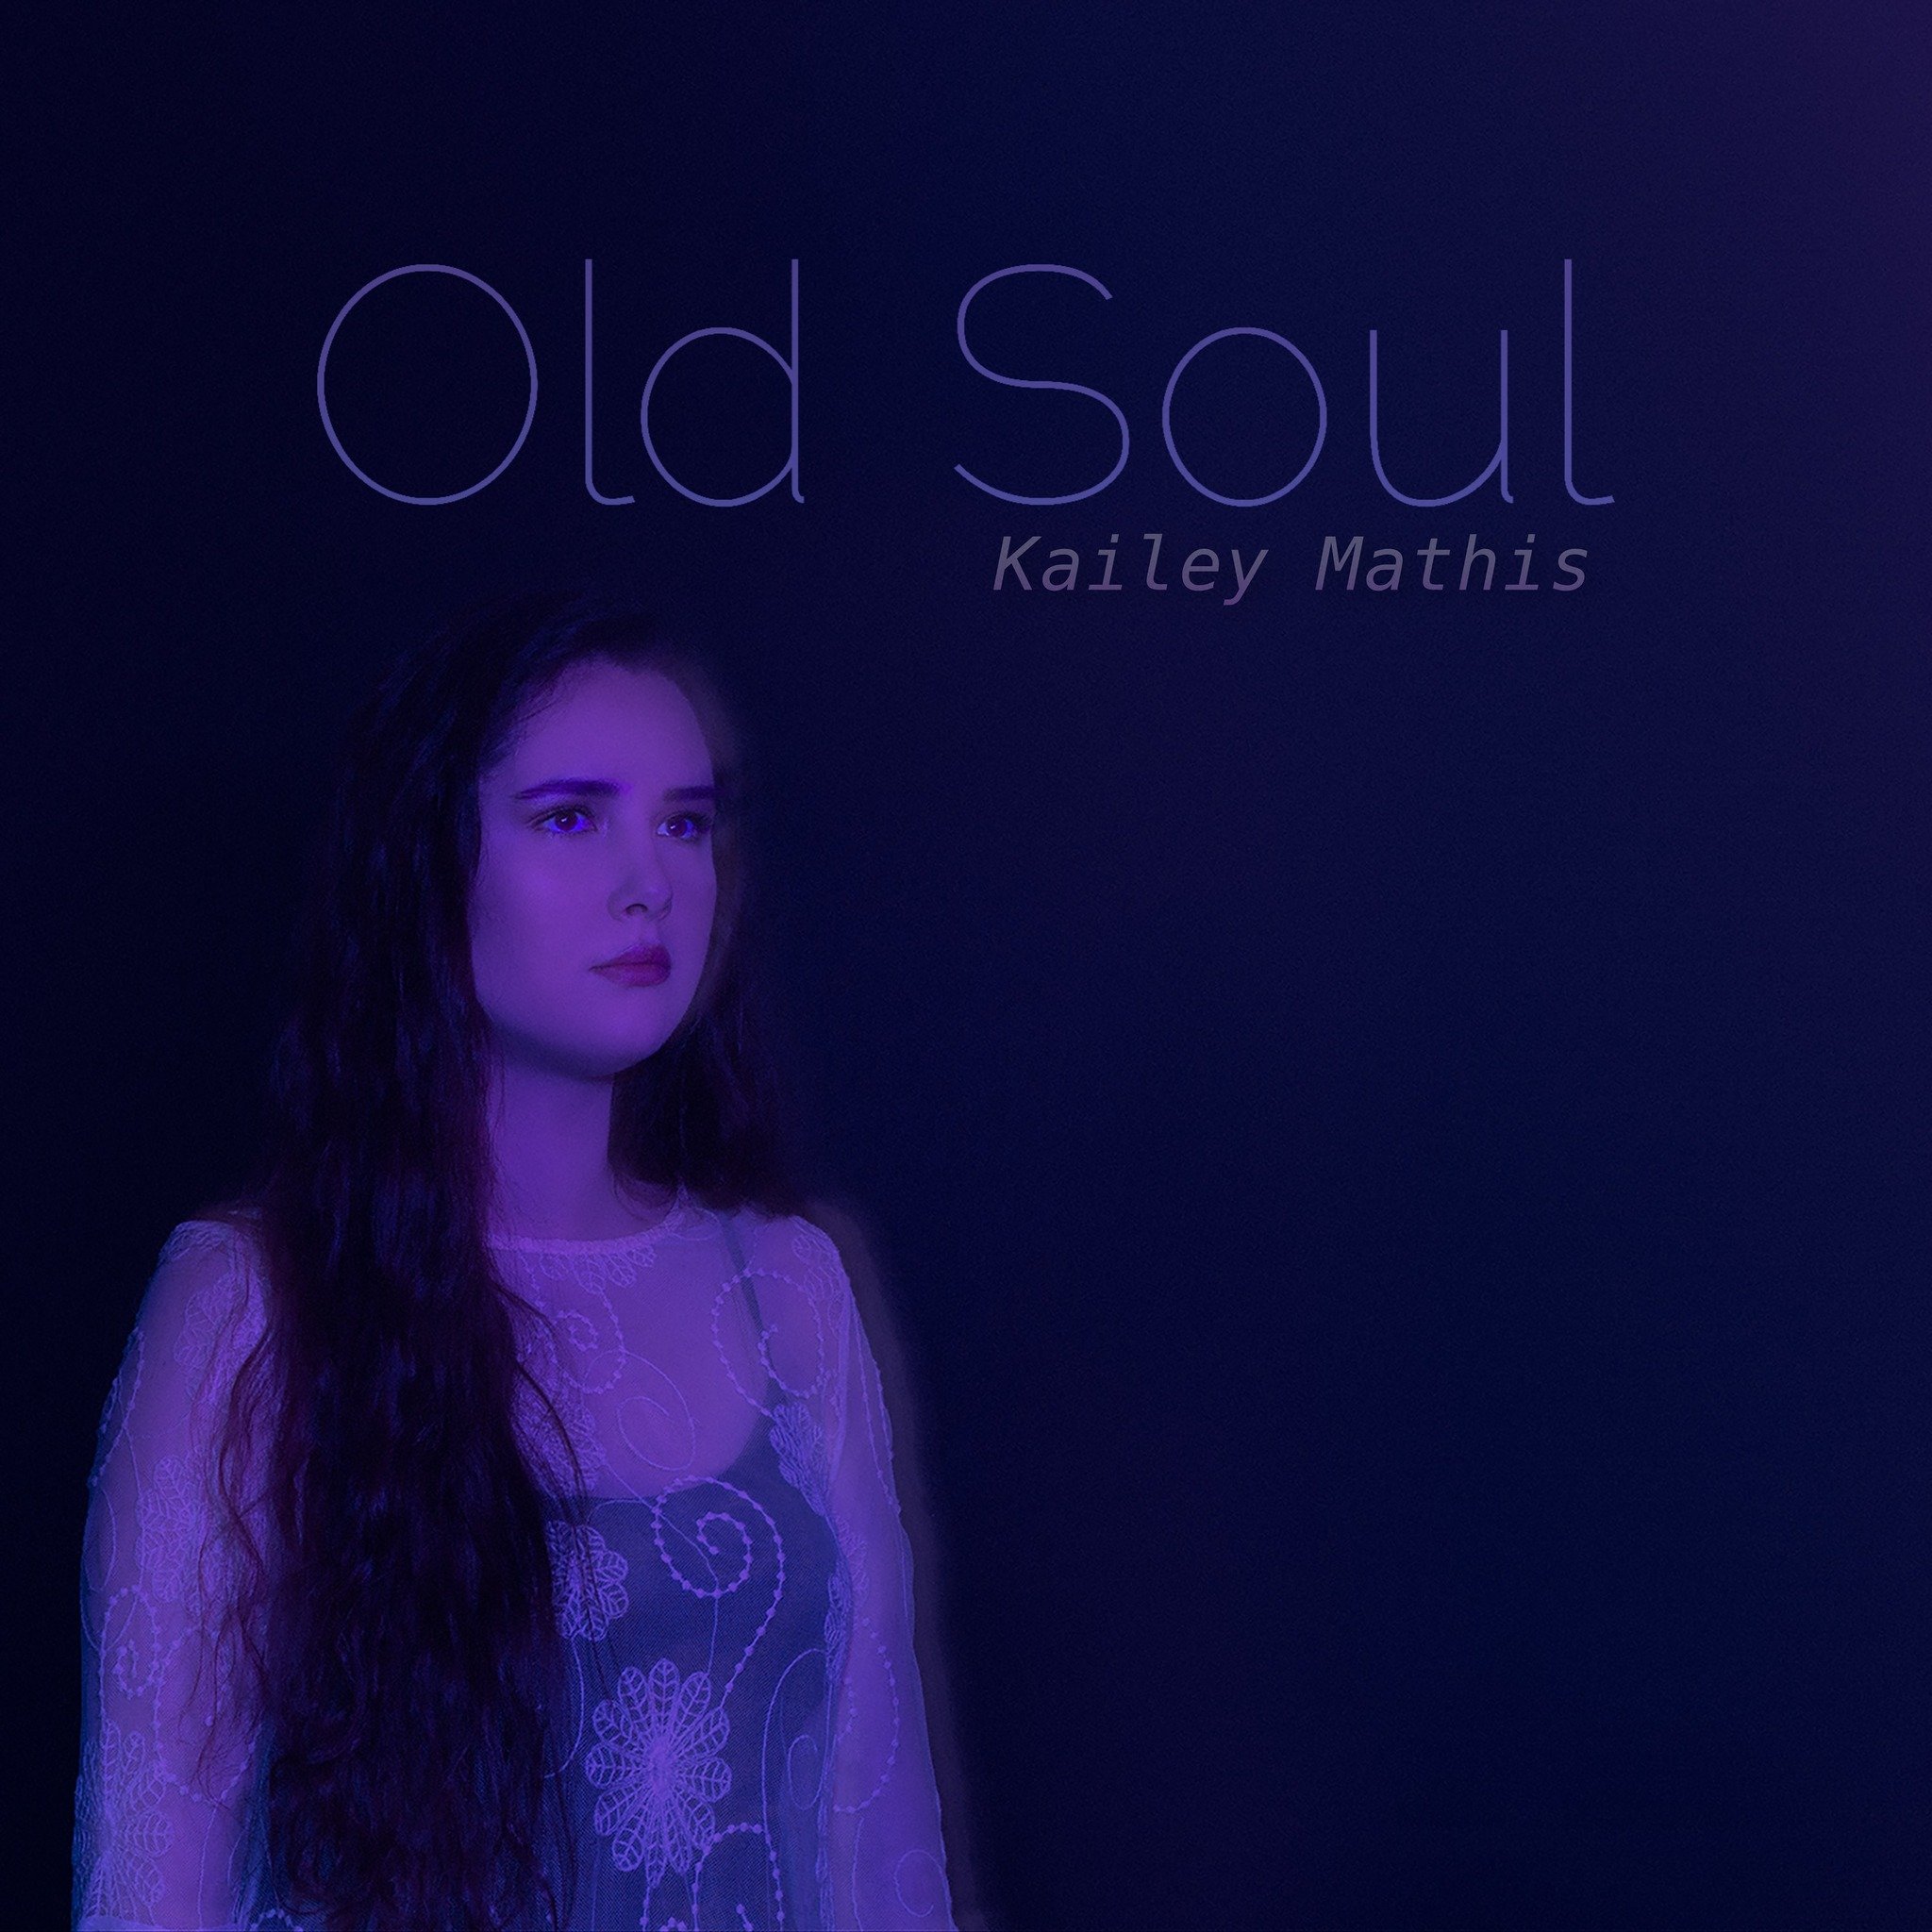 2 years (&amp; 2 days) since my debut album Old Soul was released 💜 Time seems to be in fast forward mode these days. It feels like yesterday that I was setting up for my album release party and staying up for the midnight release and waiting for th